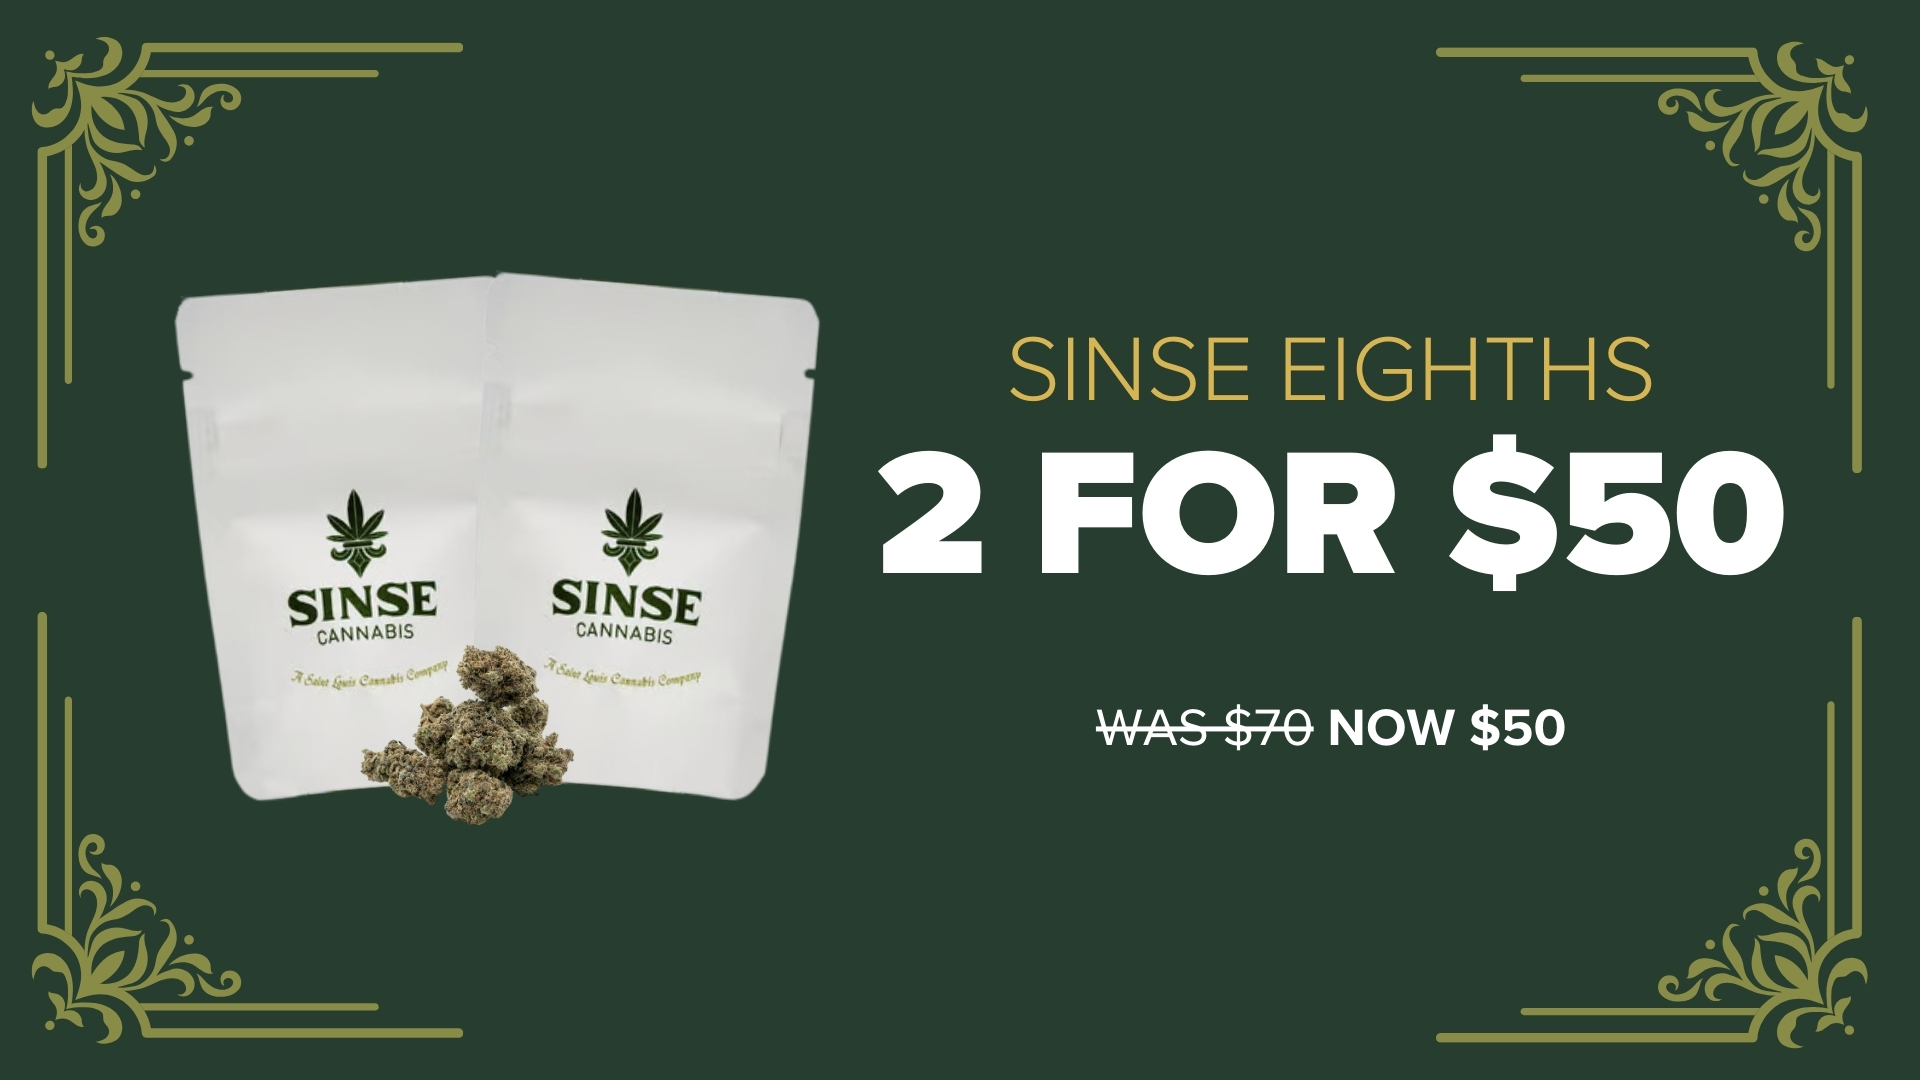 Sinse Cannabis 14g 1 for $85 or 2 for $150